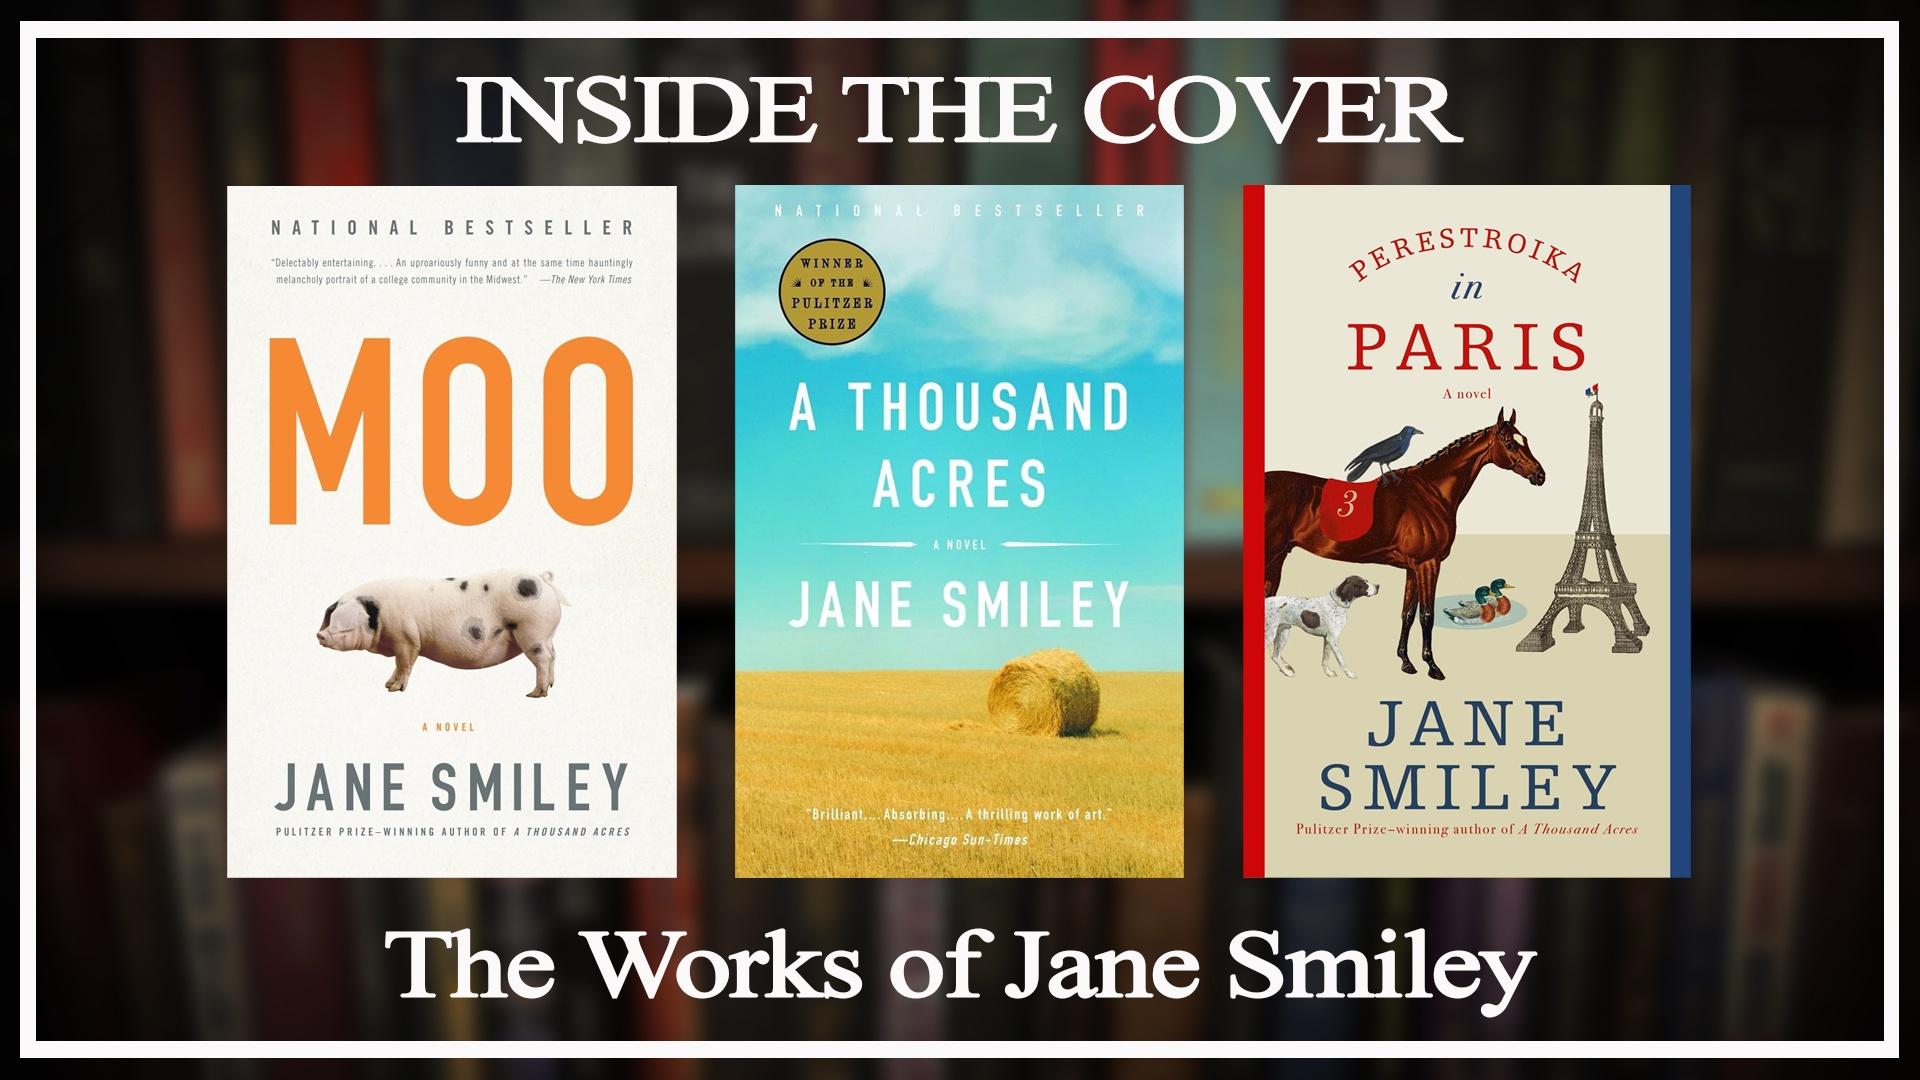 The Works of Jane Smiley